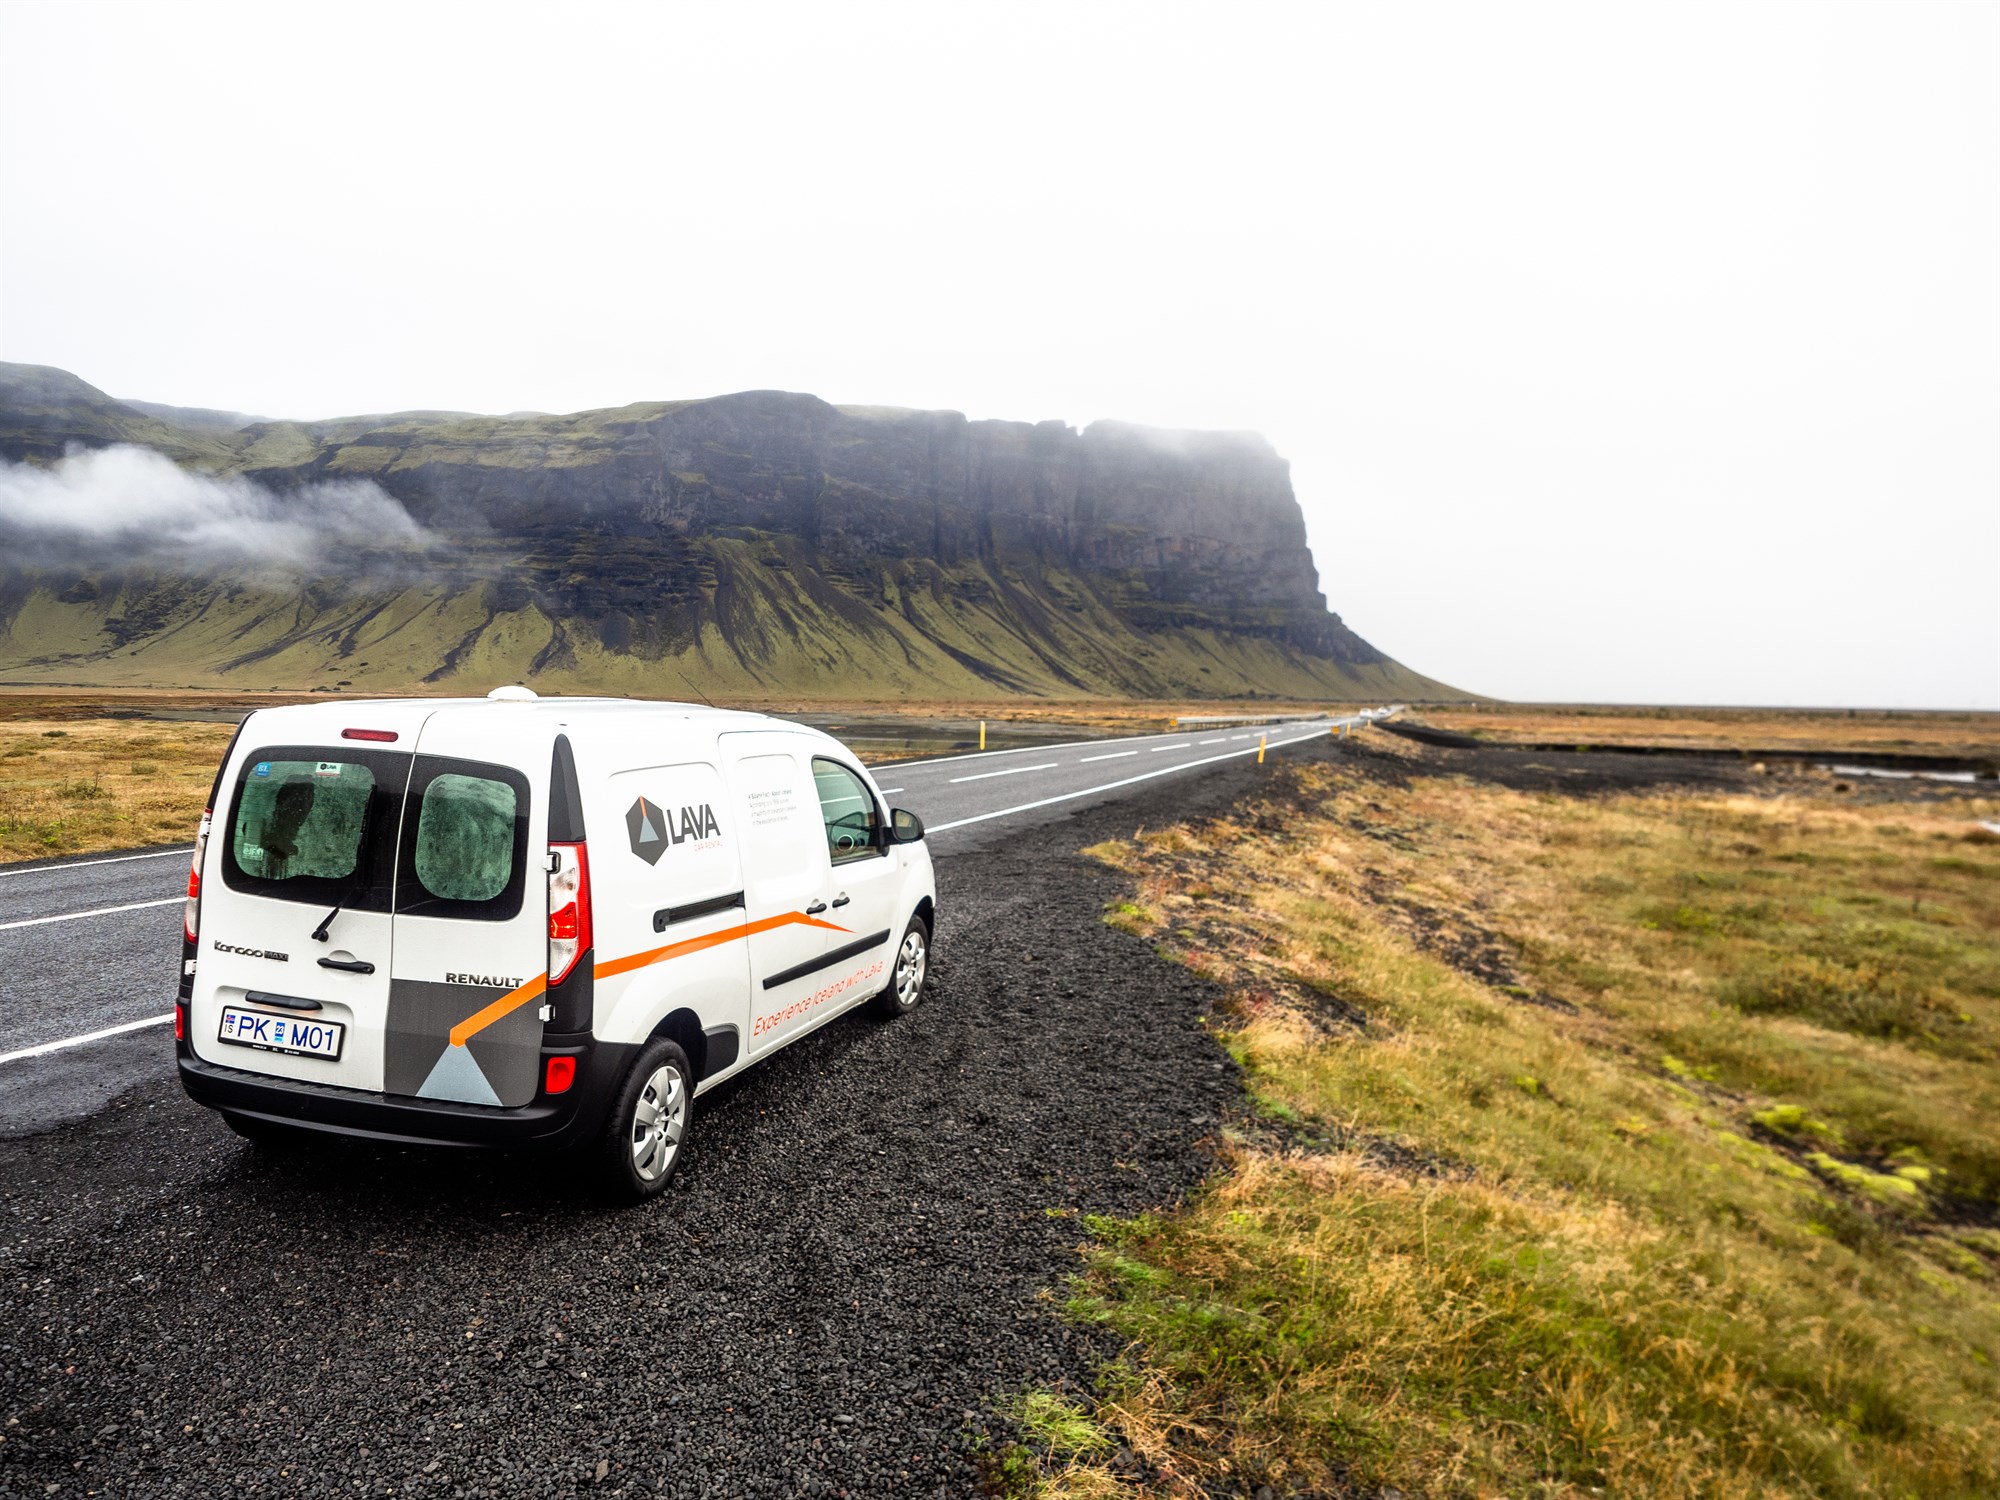 Kangoo maxi on the road in Iceland